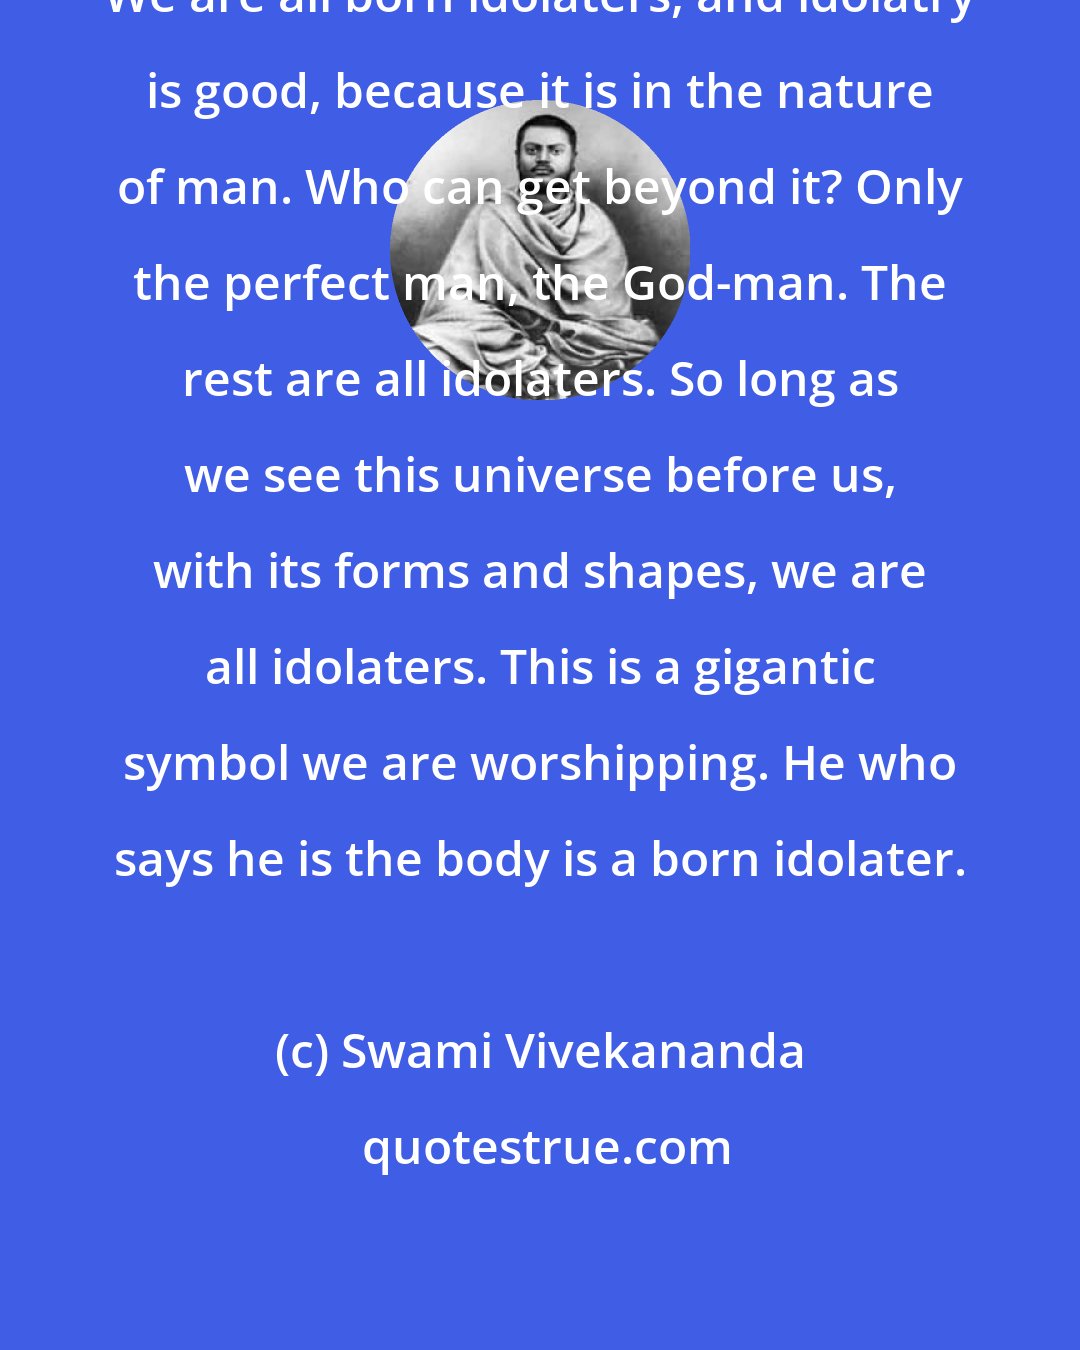 Swami Vivekananda: We are all born idolaters, and idolatry is good, because it is in the nature of man. Who can get beyond it? Only the perfect man, the God-man. The rest are all idolaters. So long as we see this universe before us, with its forms and shapes, we are all idolaters. This is a gigantic symbol we are worshipping. He who says he is the body is a born idolater.